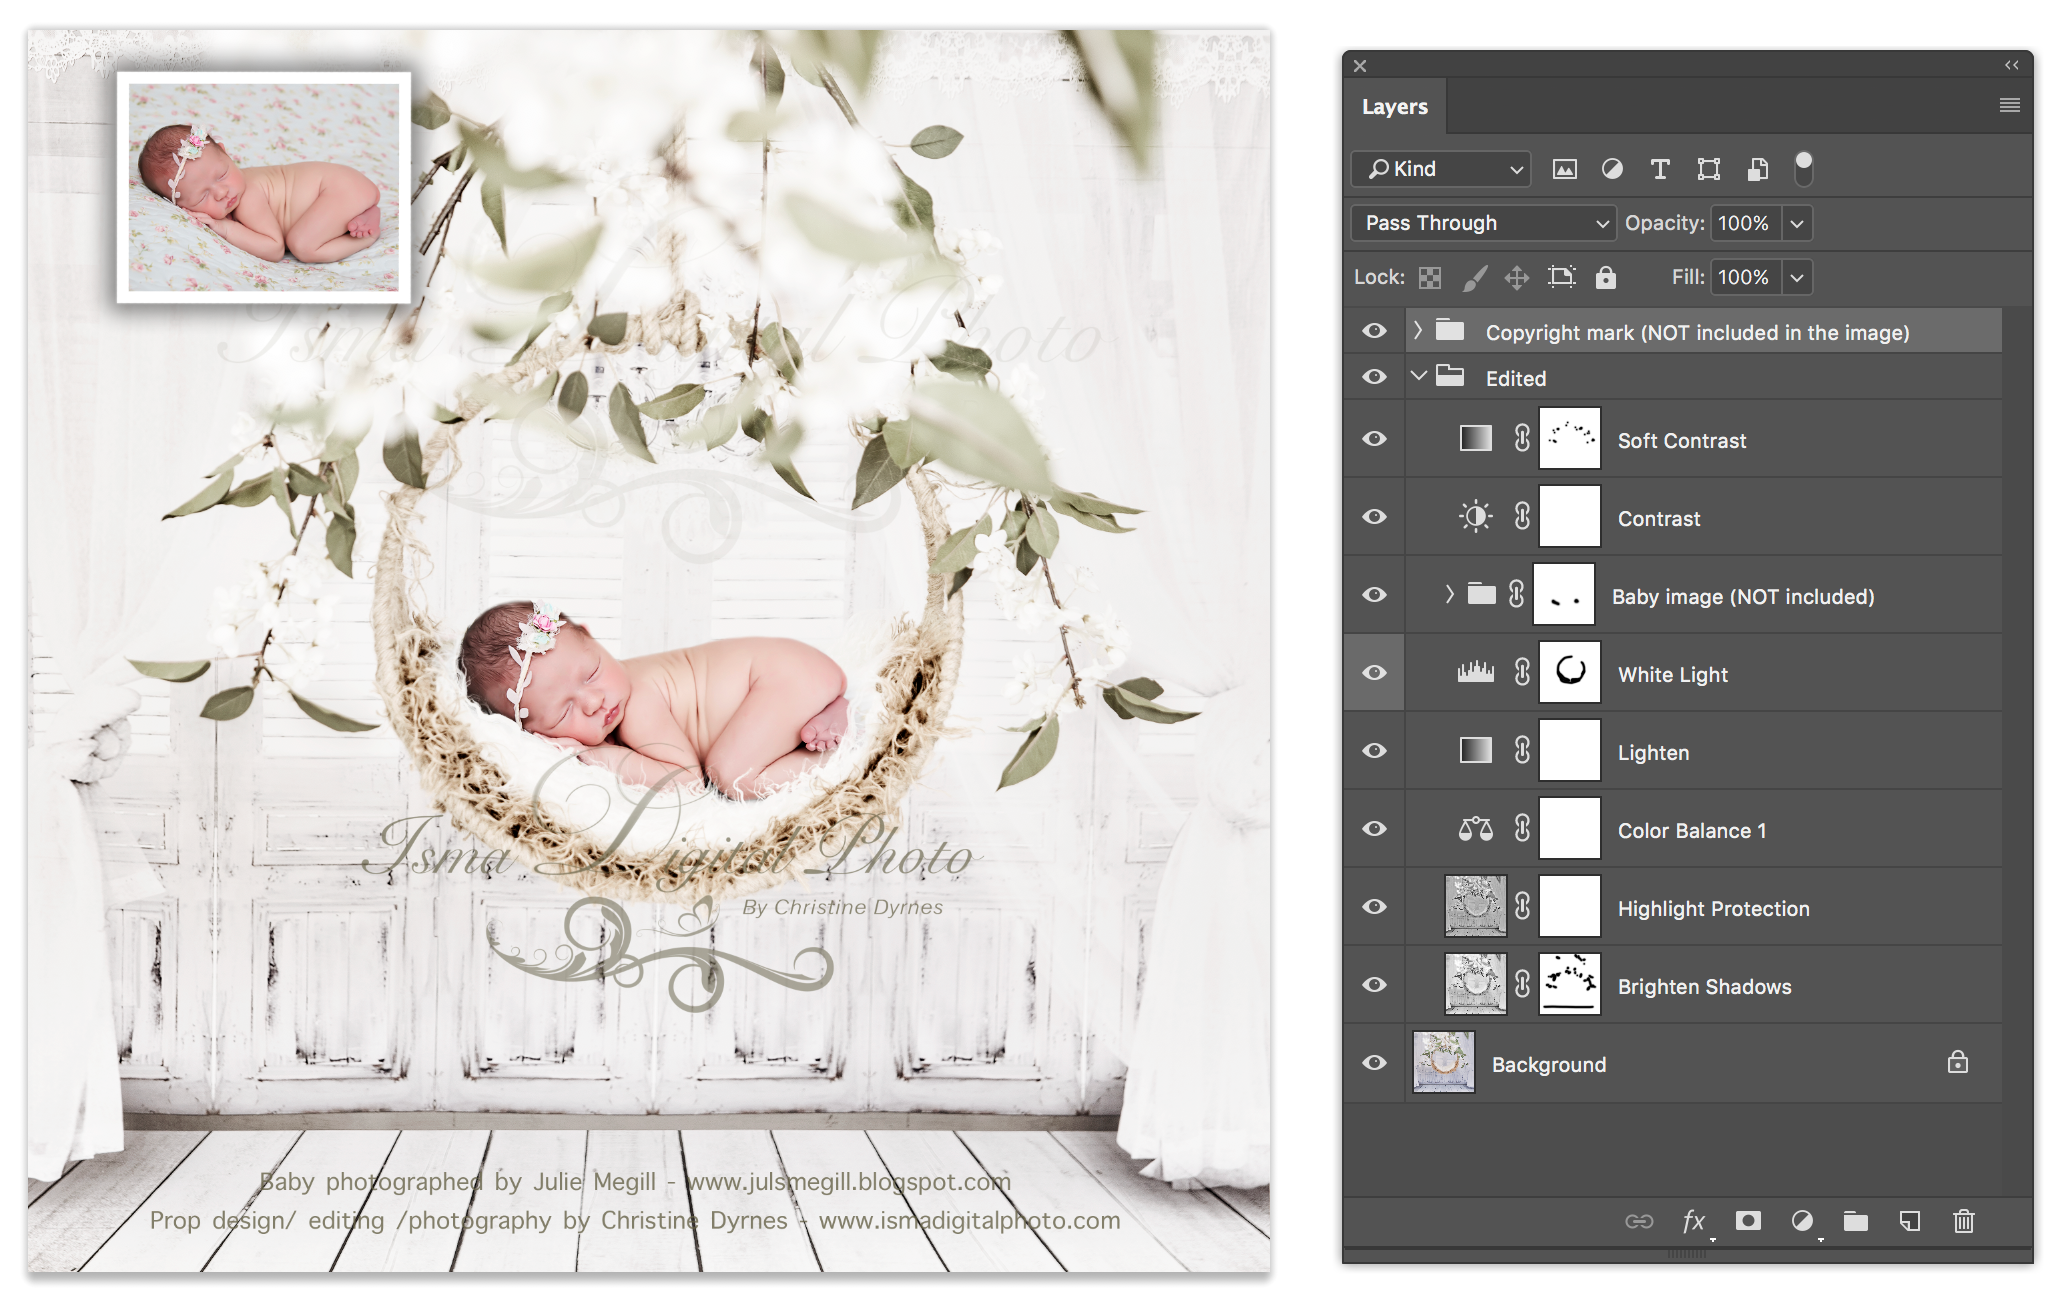 Digital backdrop /Props for Newborn /baby photography - High resolution digital backdrop /background - One JPG and one PSD file with layers